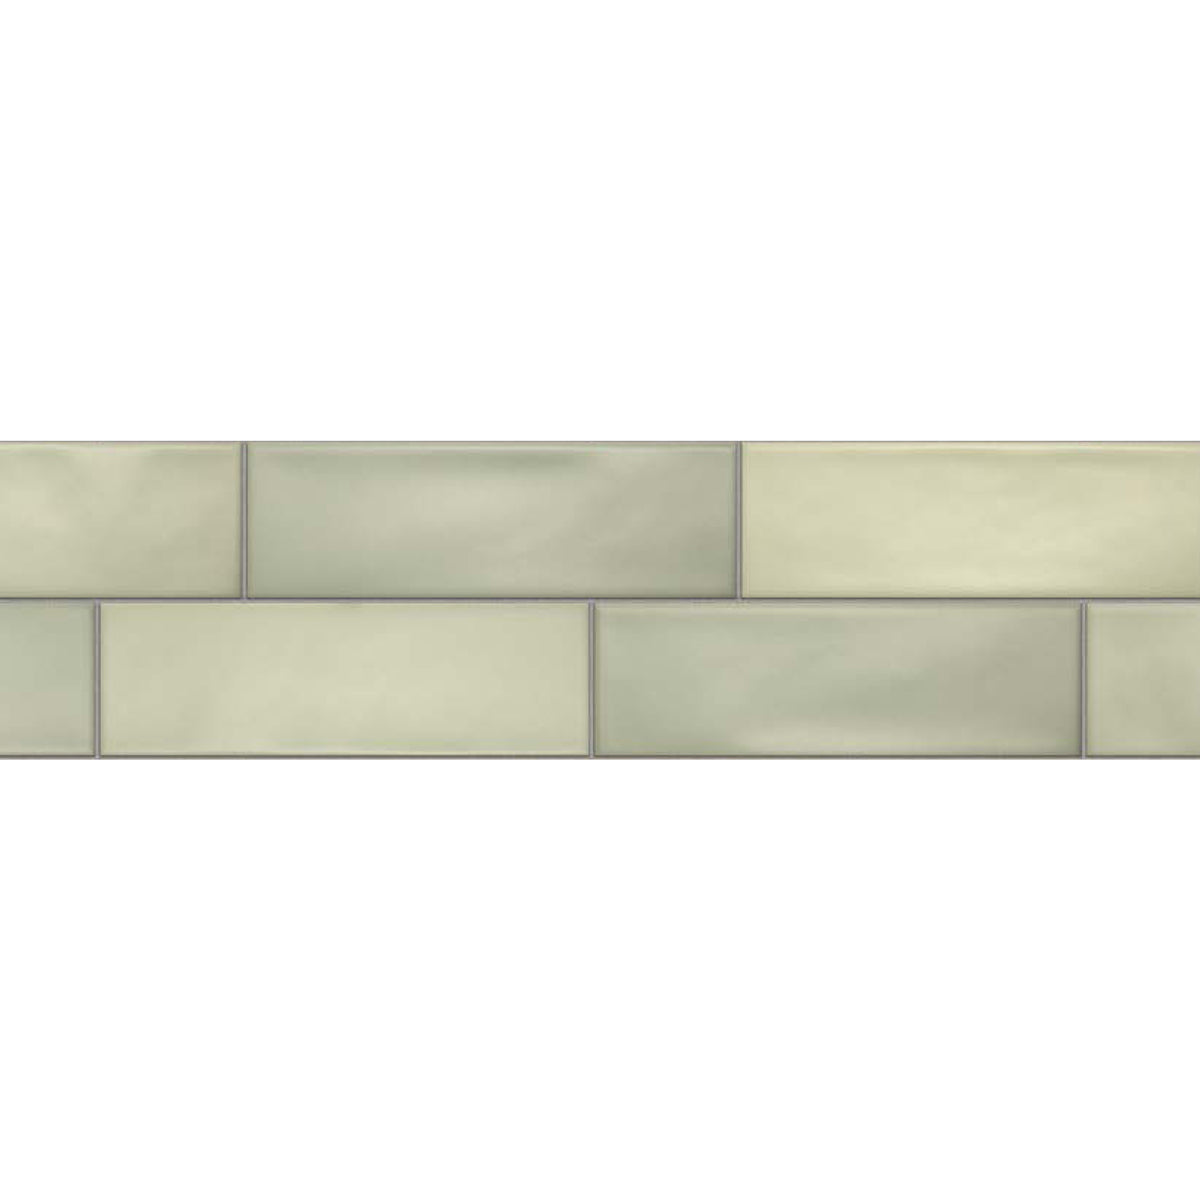 Topcu - Chalky - 2.5 in. x 8 in. Ceramic Wall Tile - Acqua Installed